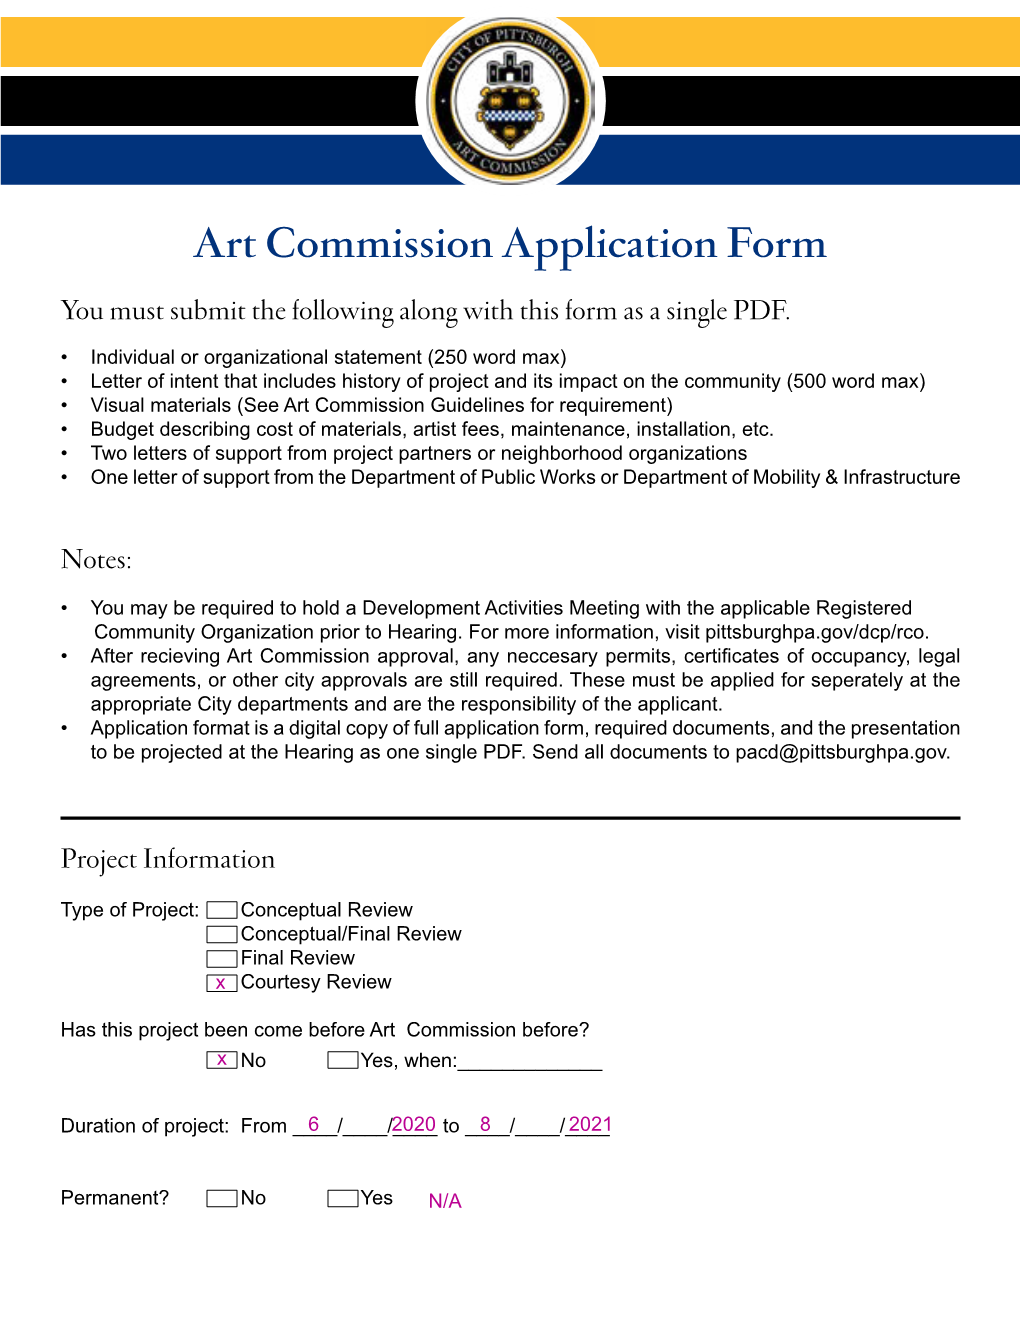 Art Commission Application Form You Must Submit the Following Along with This Form As a Single PDF